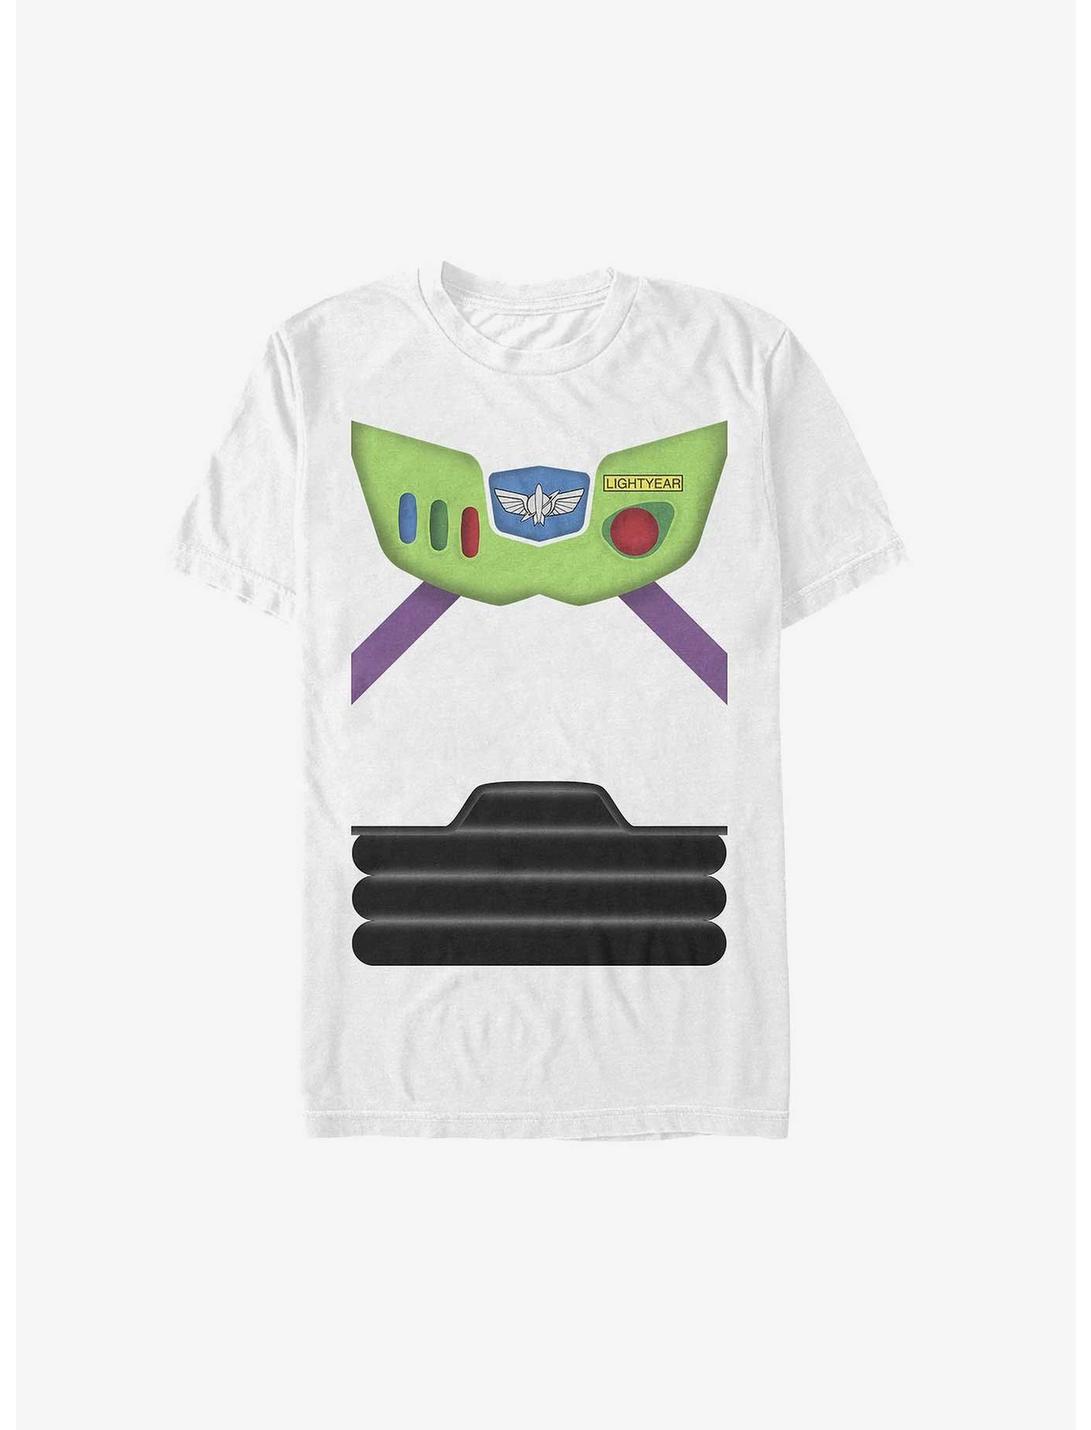 Disney Toy Story Buzz Lightyear Suit T-Shirt, WHITE, hi-res